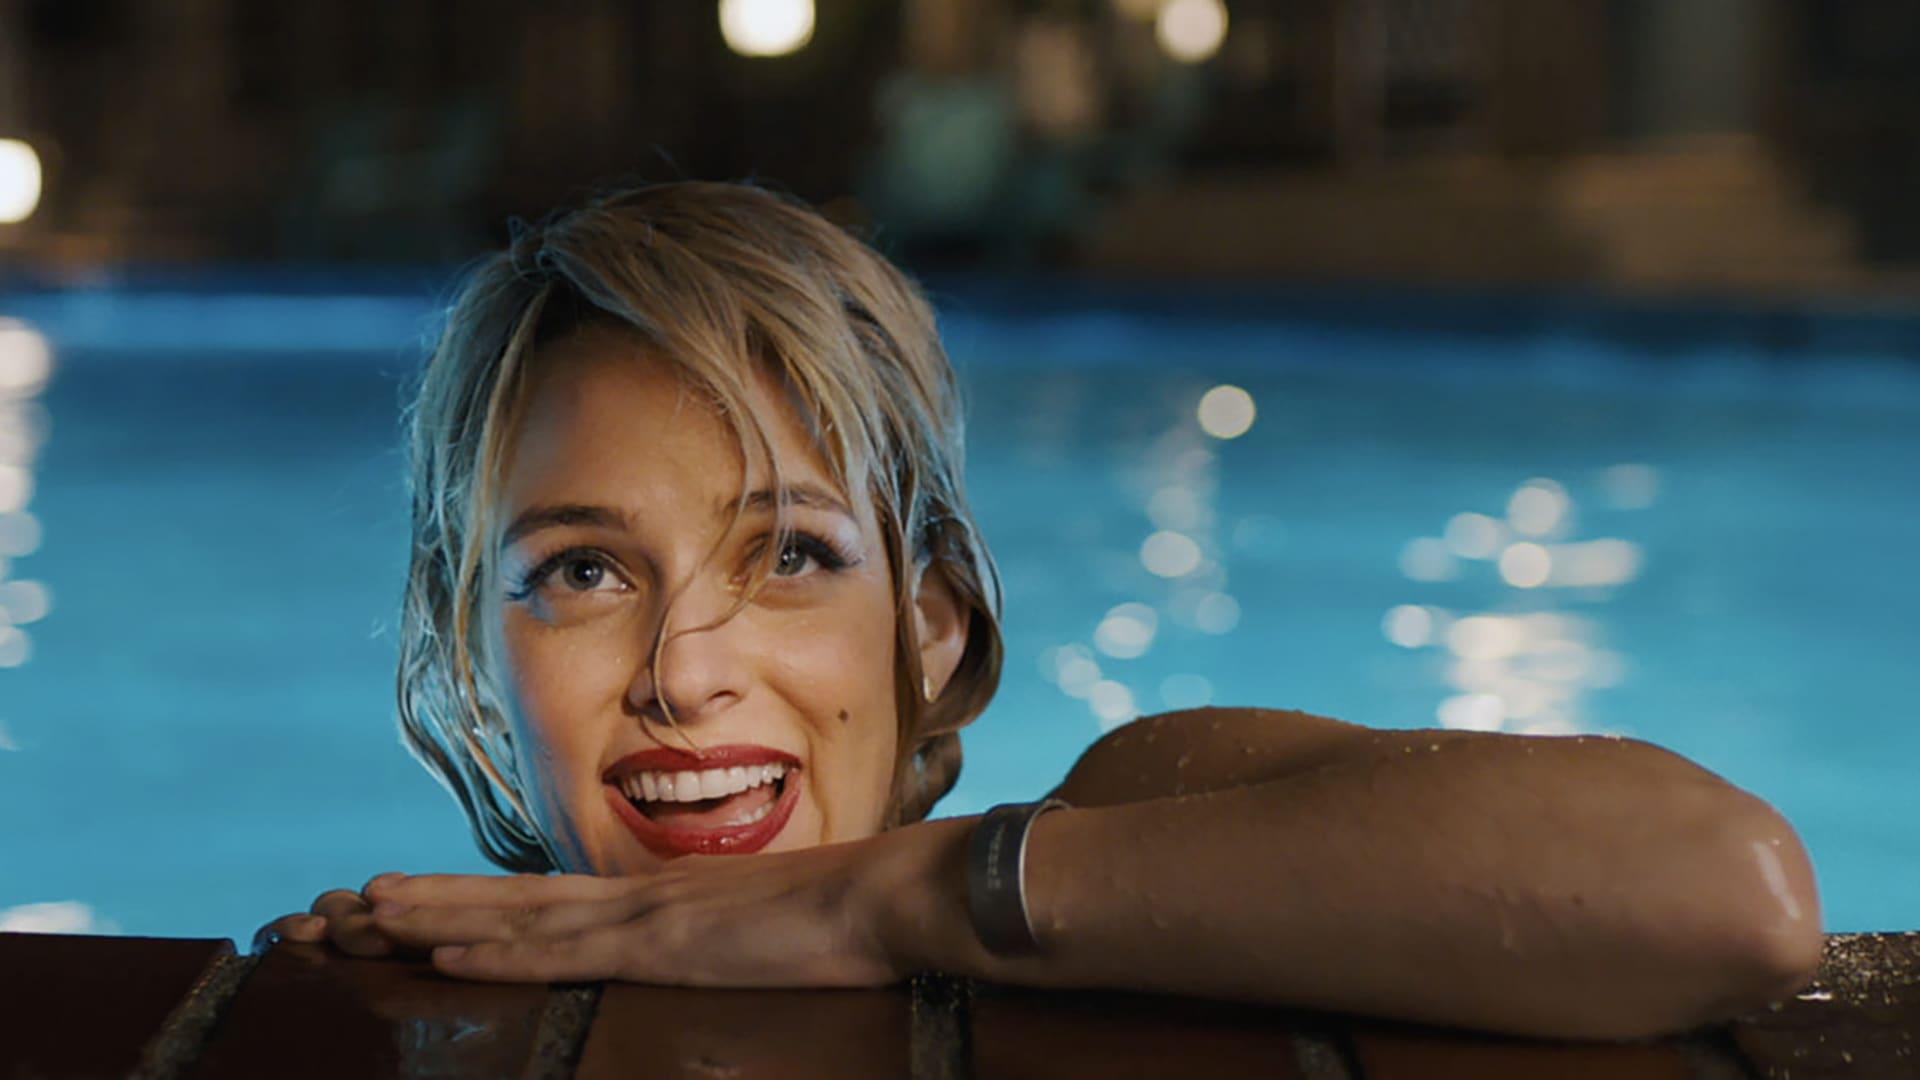 Backdrop Image for Under the Silver Lake